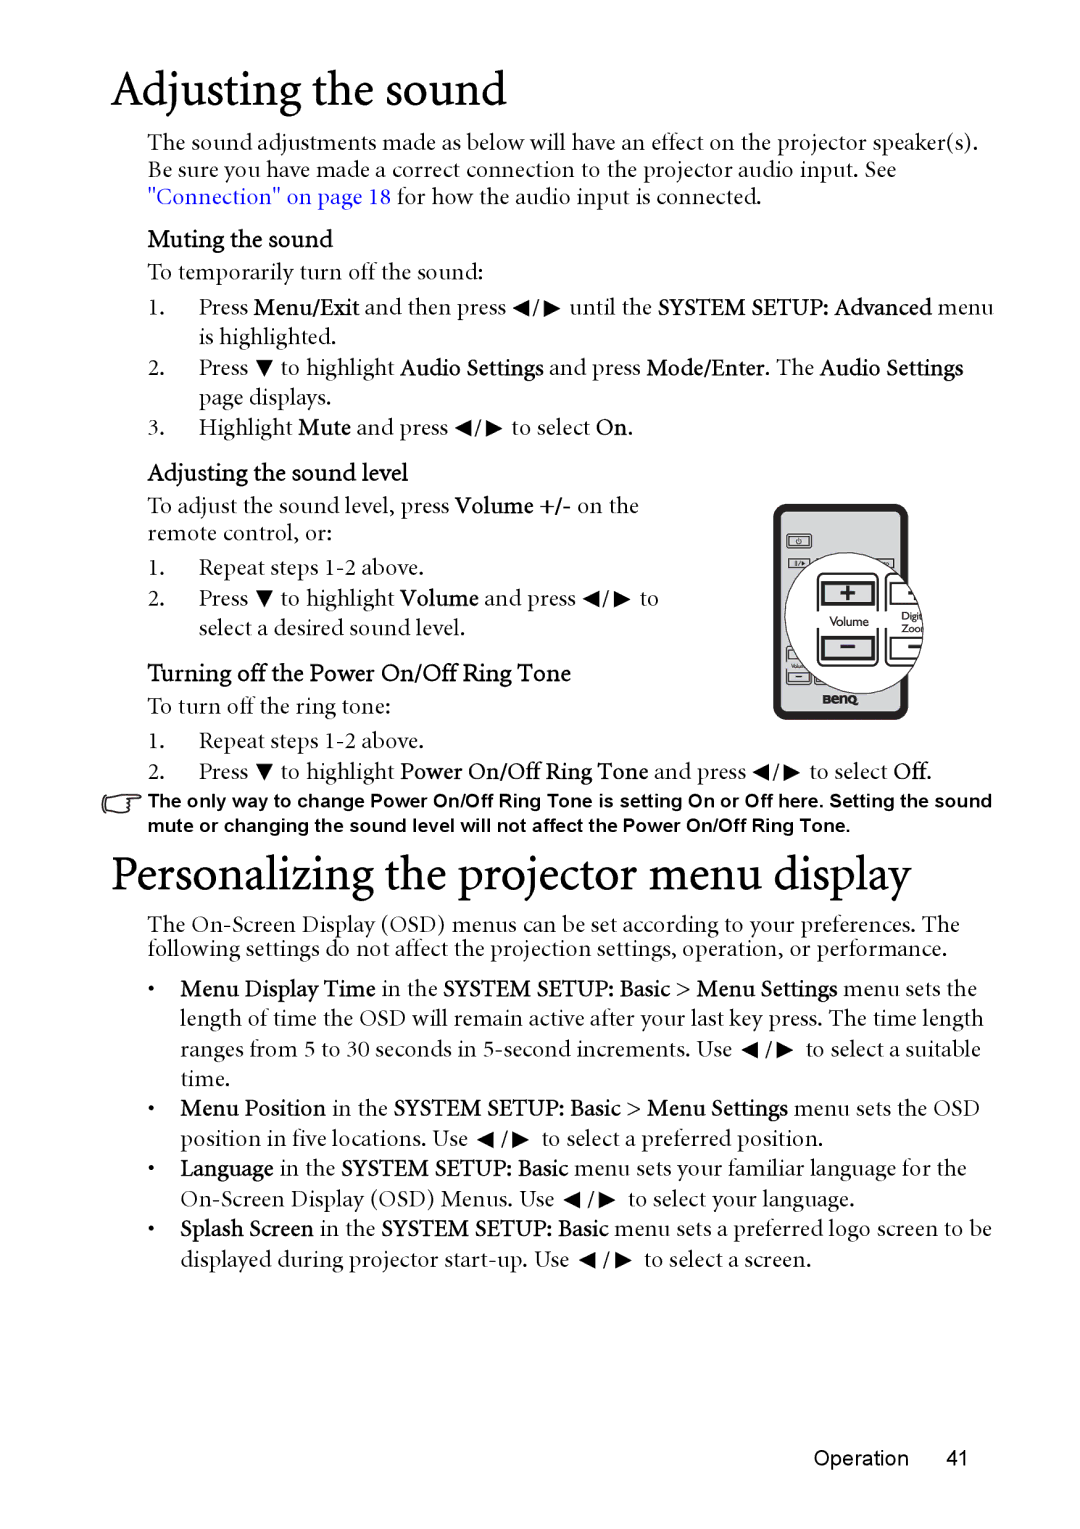 BenQ MP515 ST, MP525 ST Personalizing the projector menu display, Muting the sound, Adjusting the sound level 